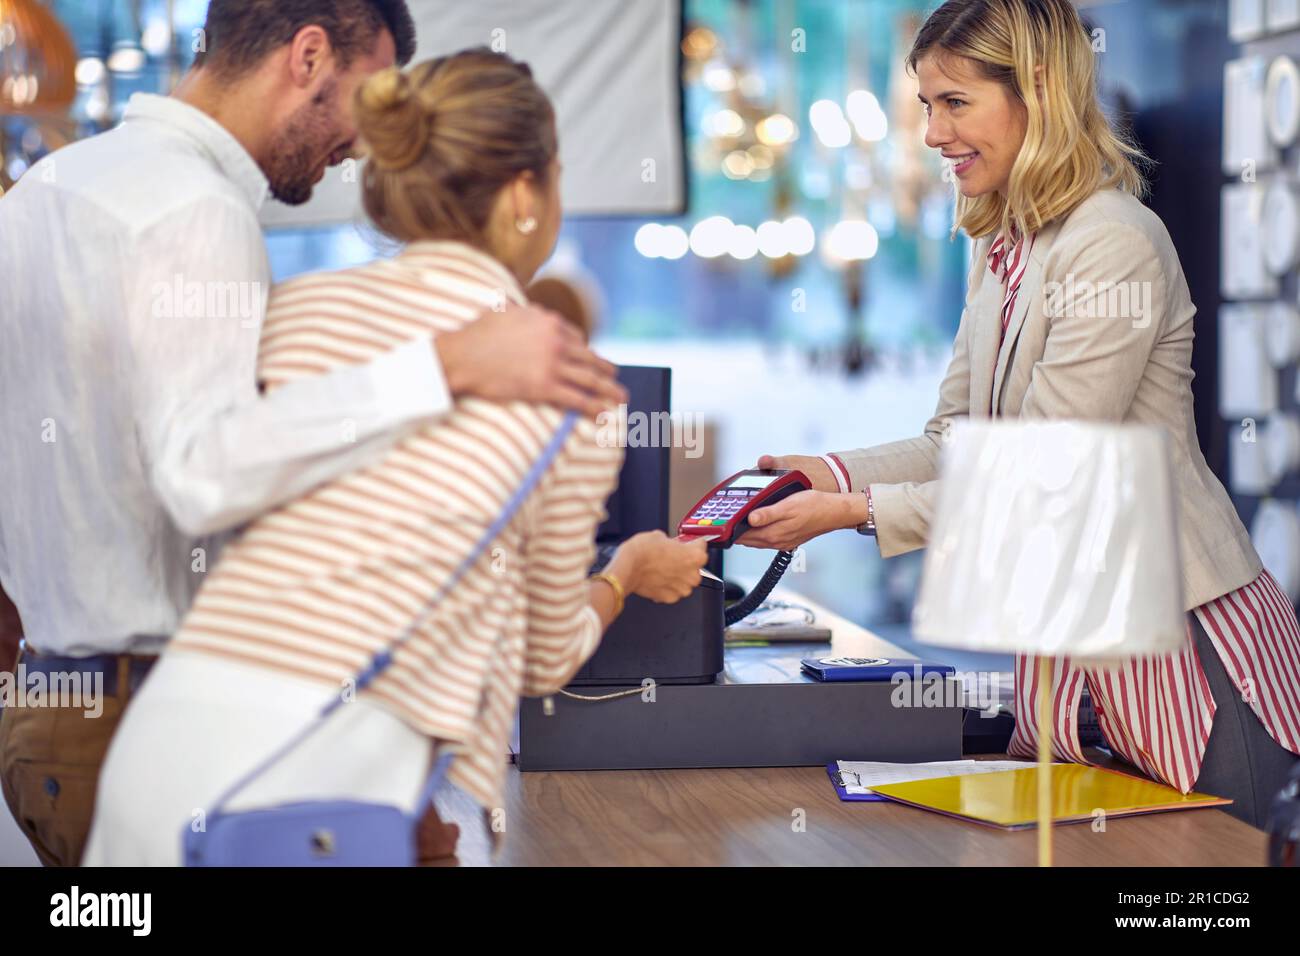 Smiling cashier processing credit card payment for young couple's purchase at lighting store Stock Photo